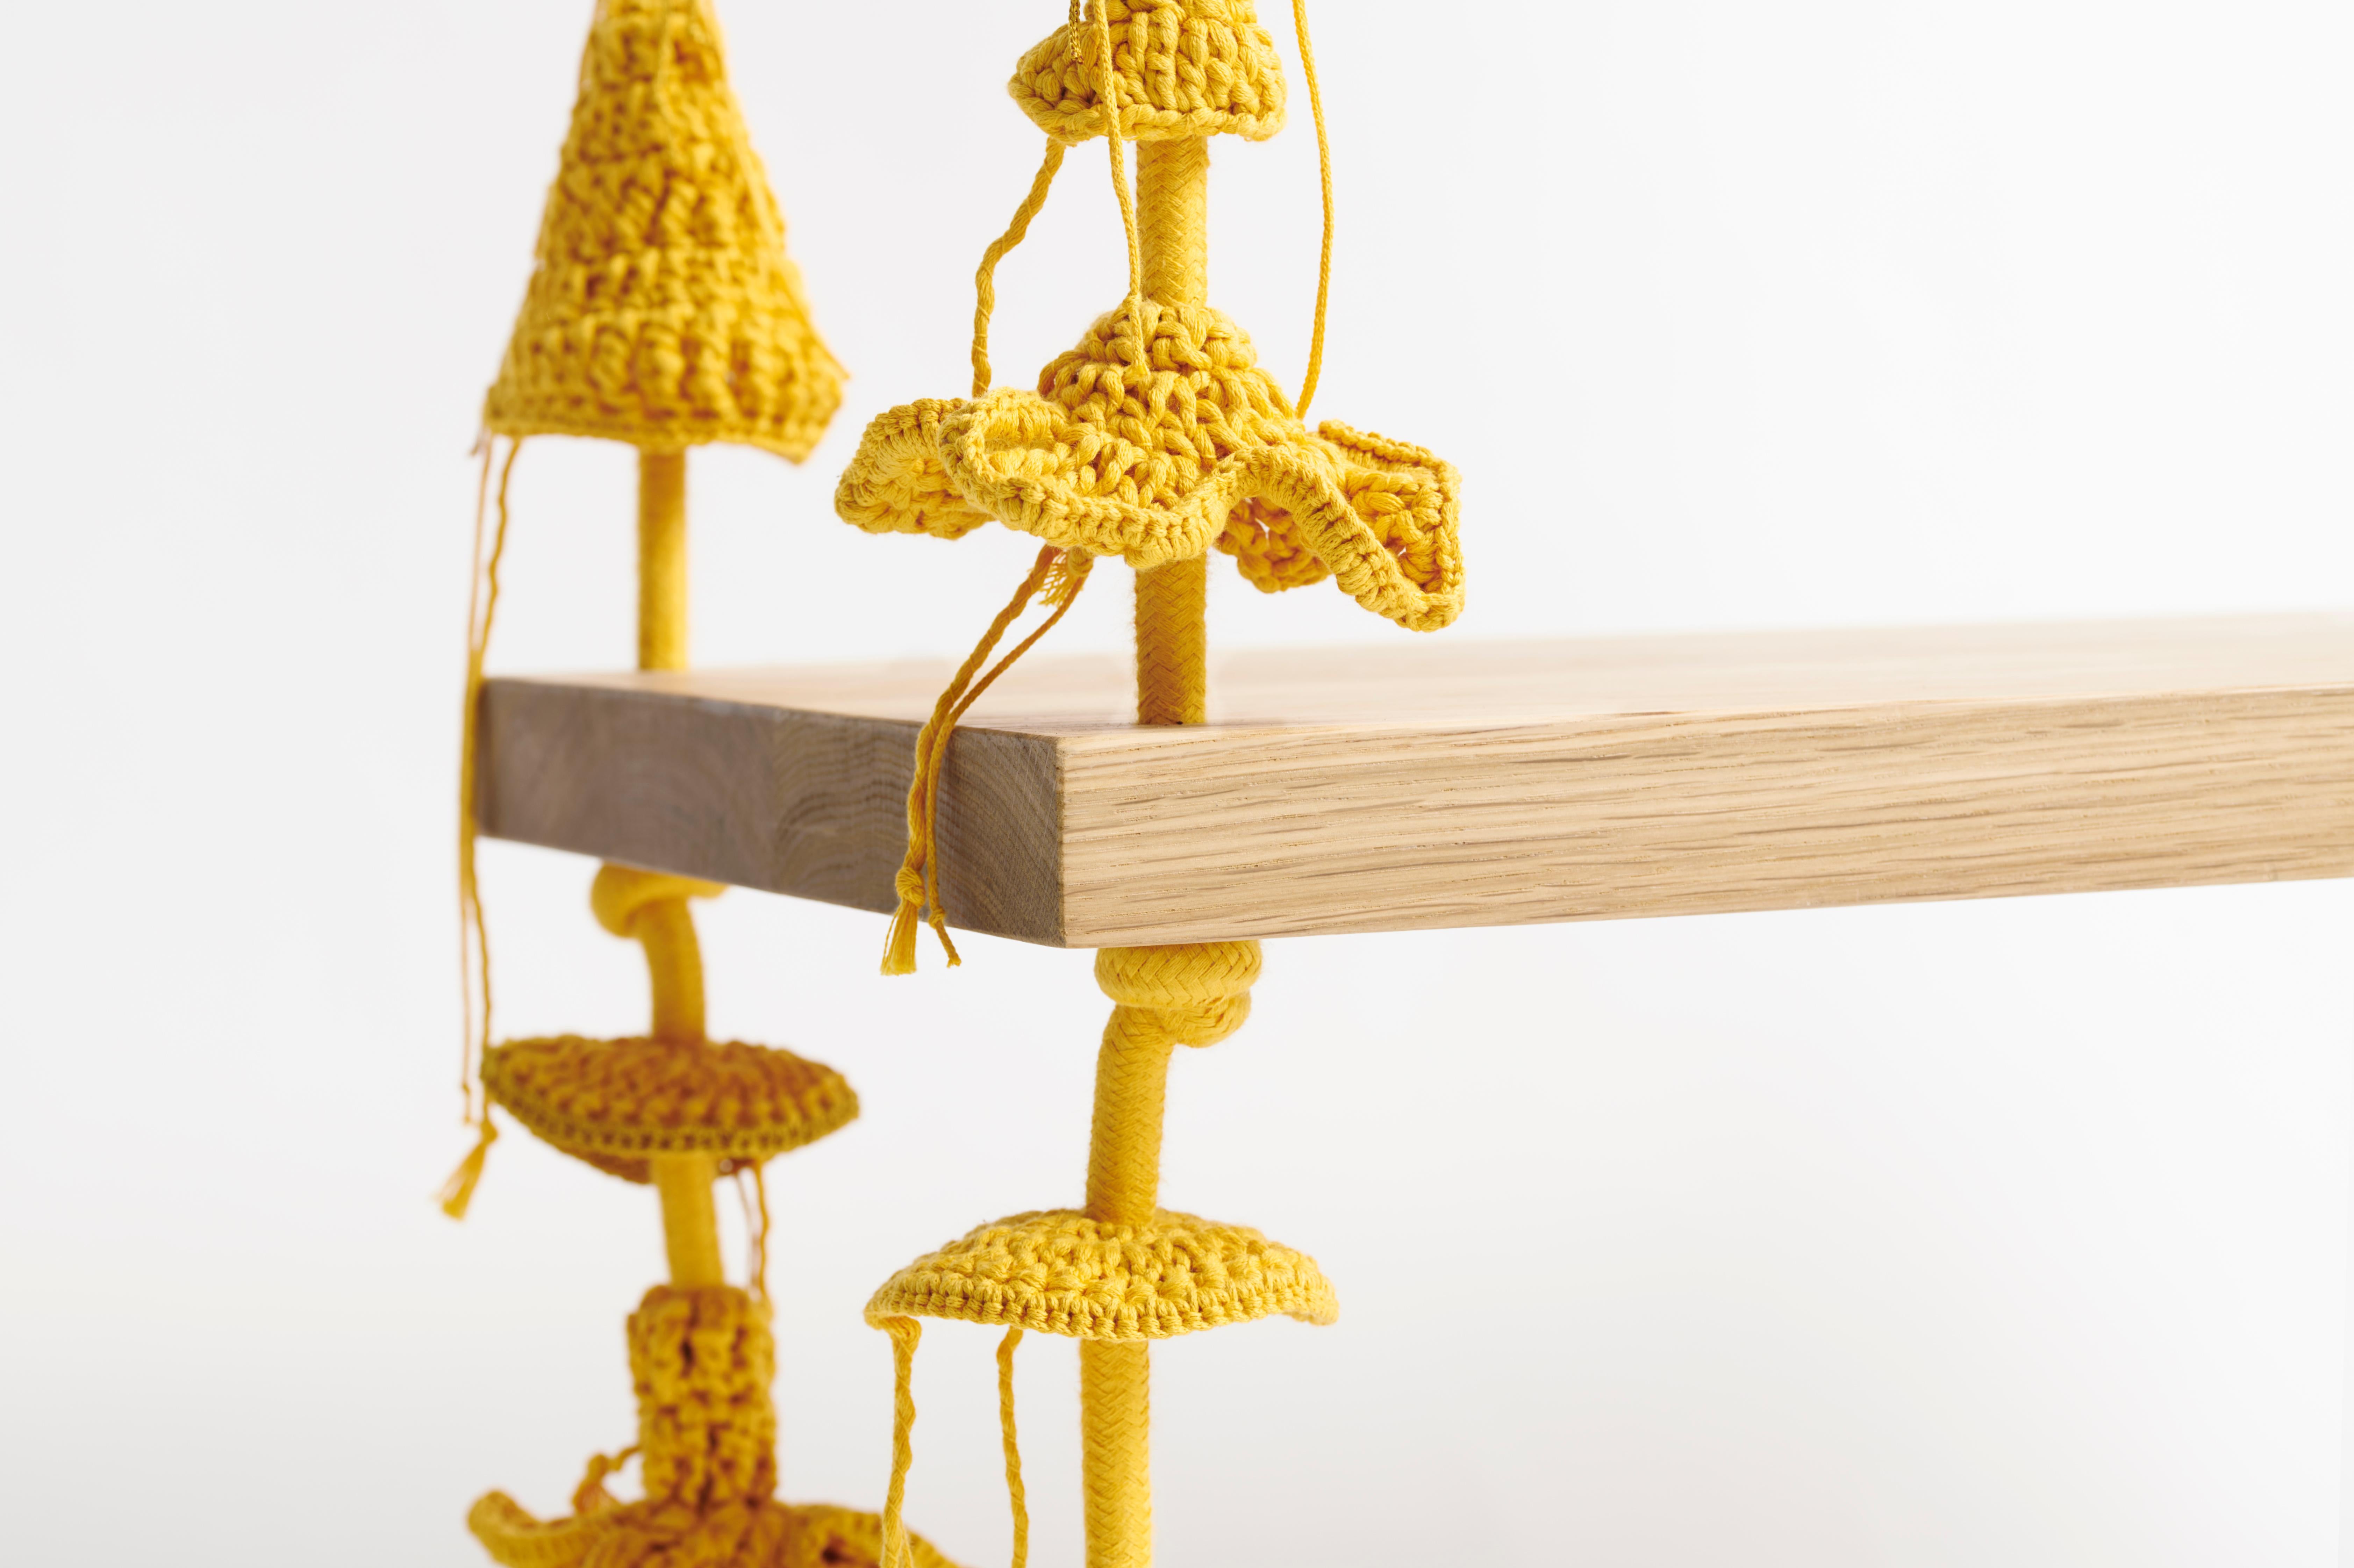 Contemporary Gold Textile Swing Handmade Crochet in Cotton & Polyester with Oak Wood Seat